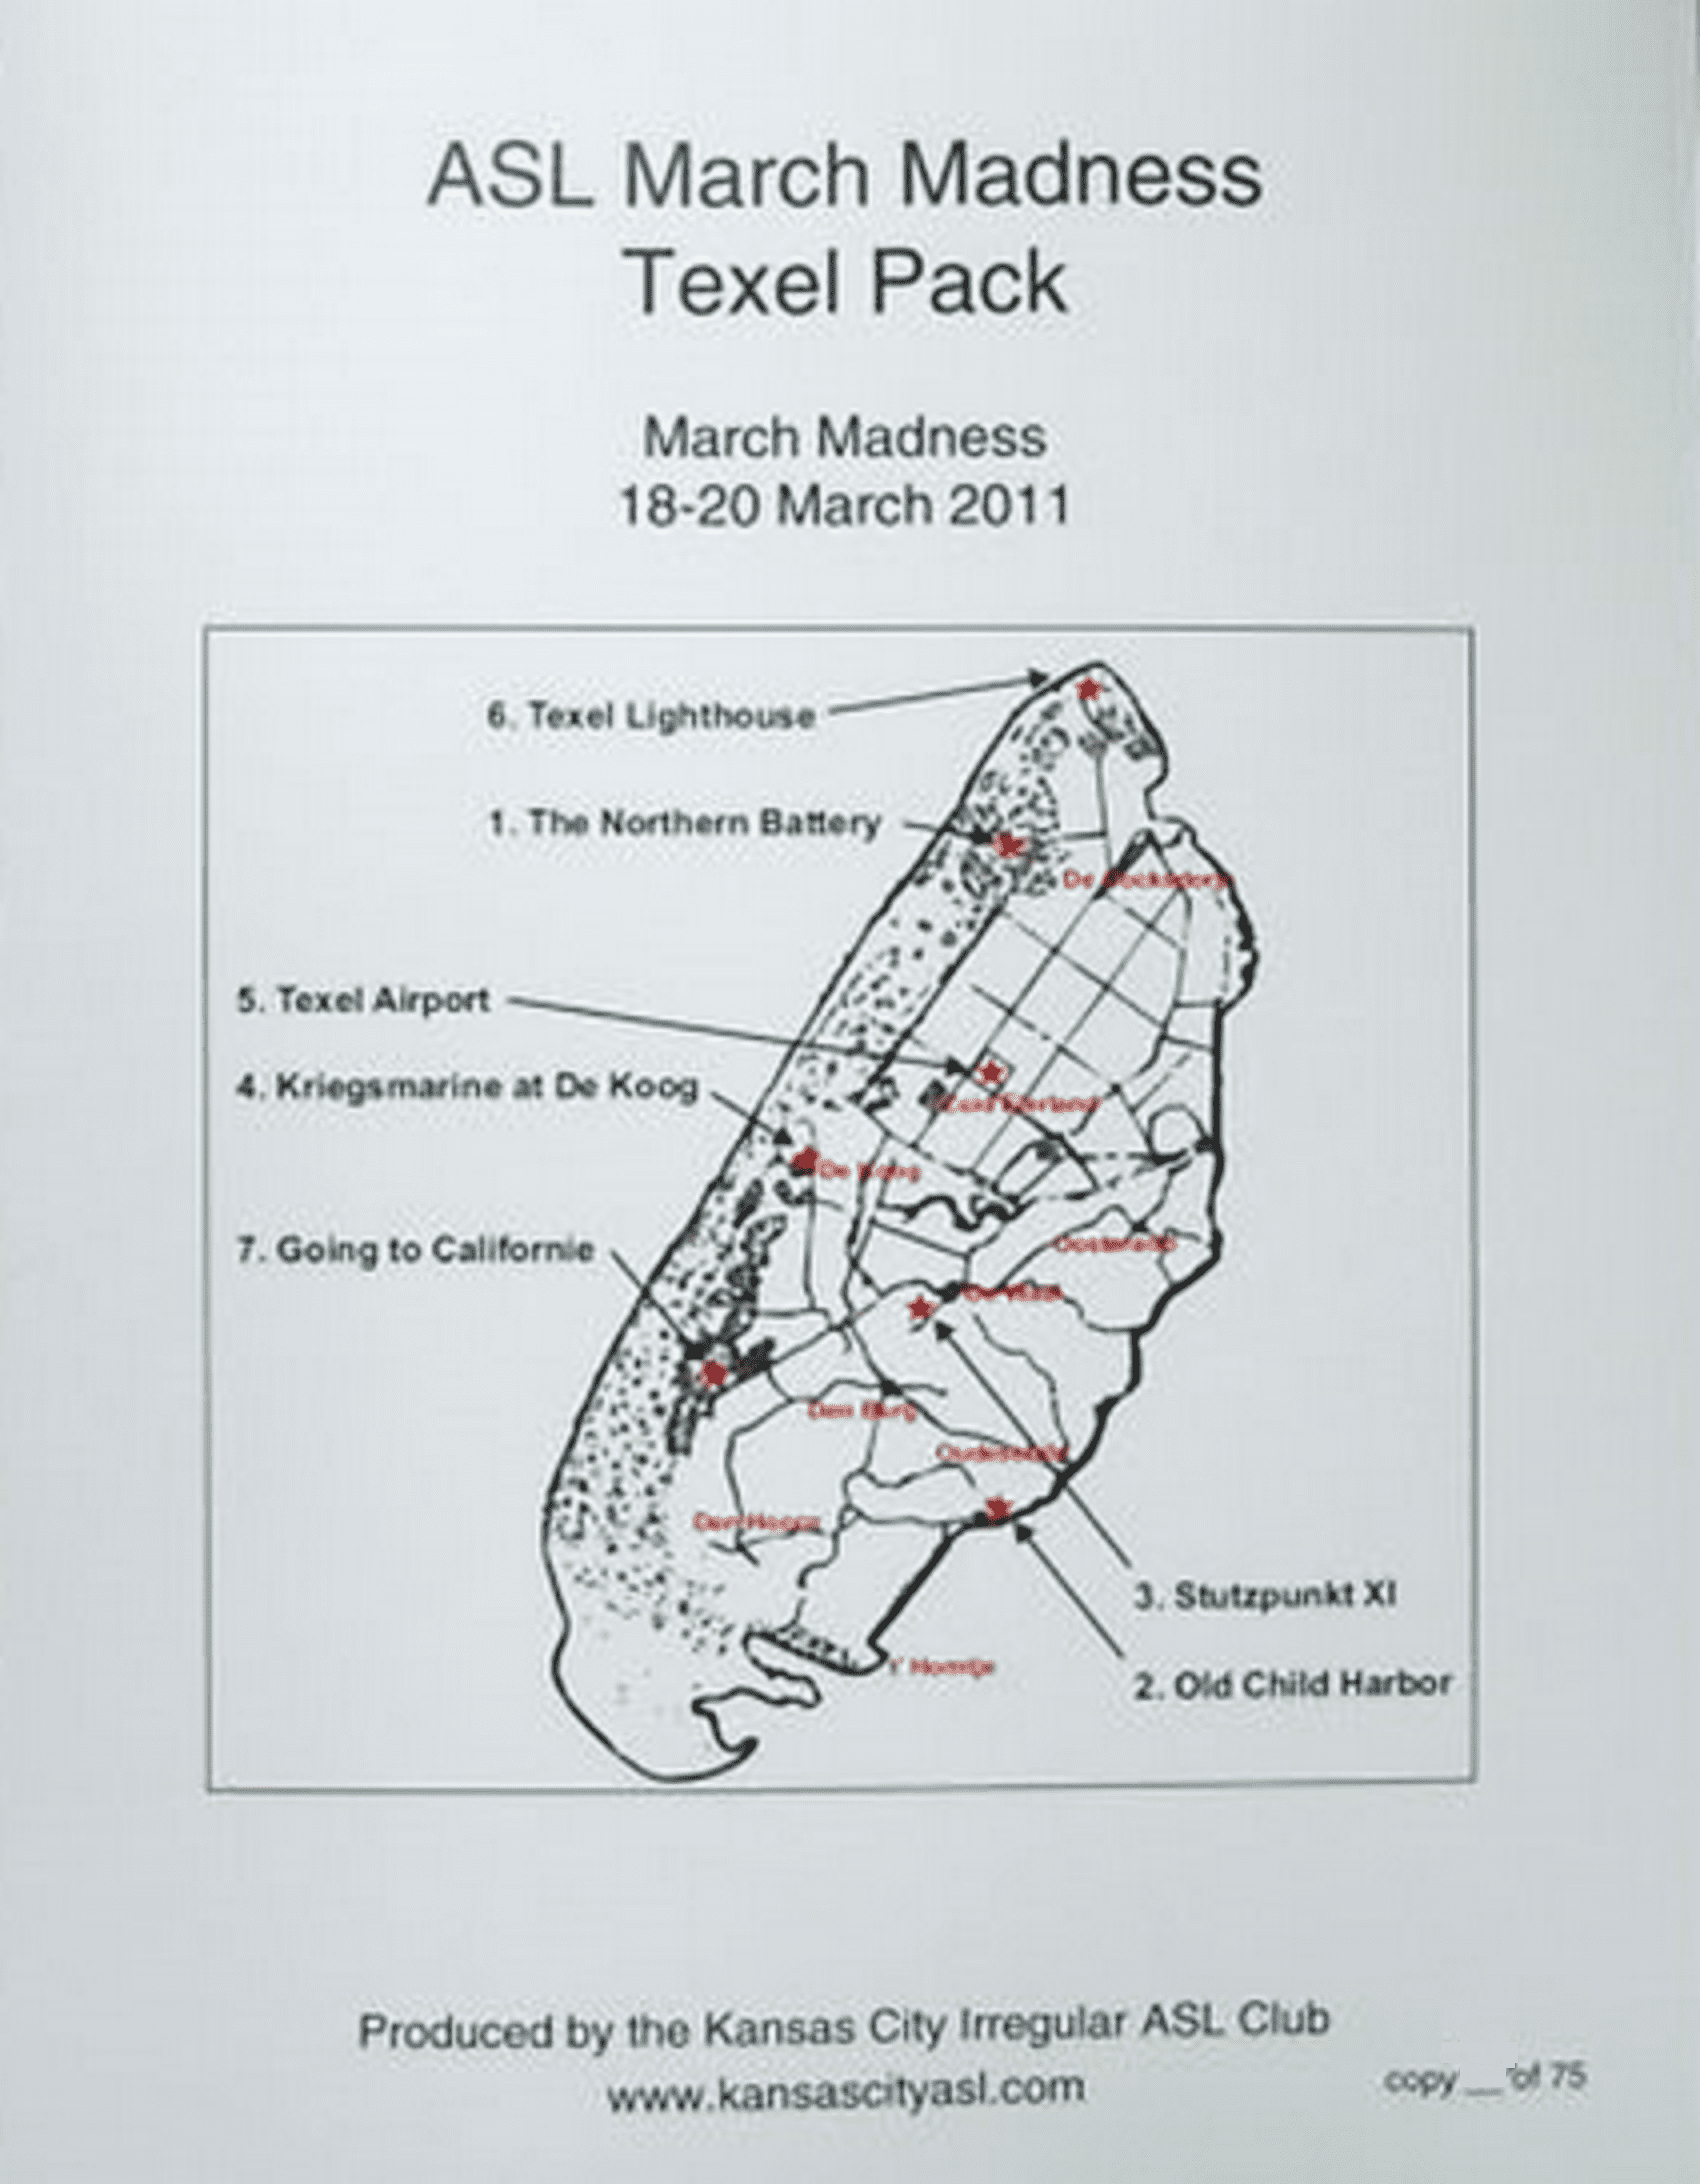 March Madness 2011 Texel Pack